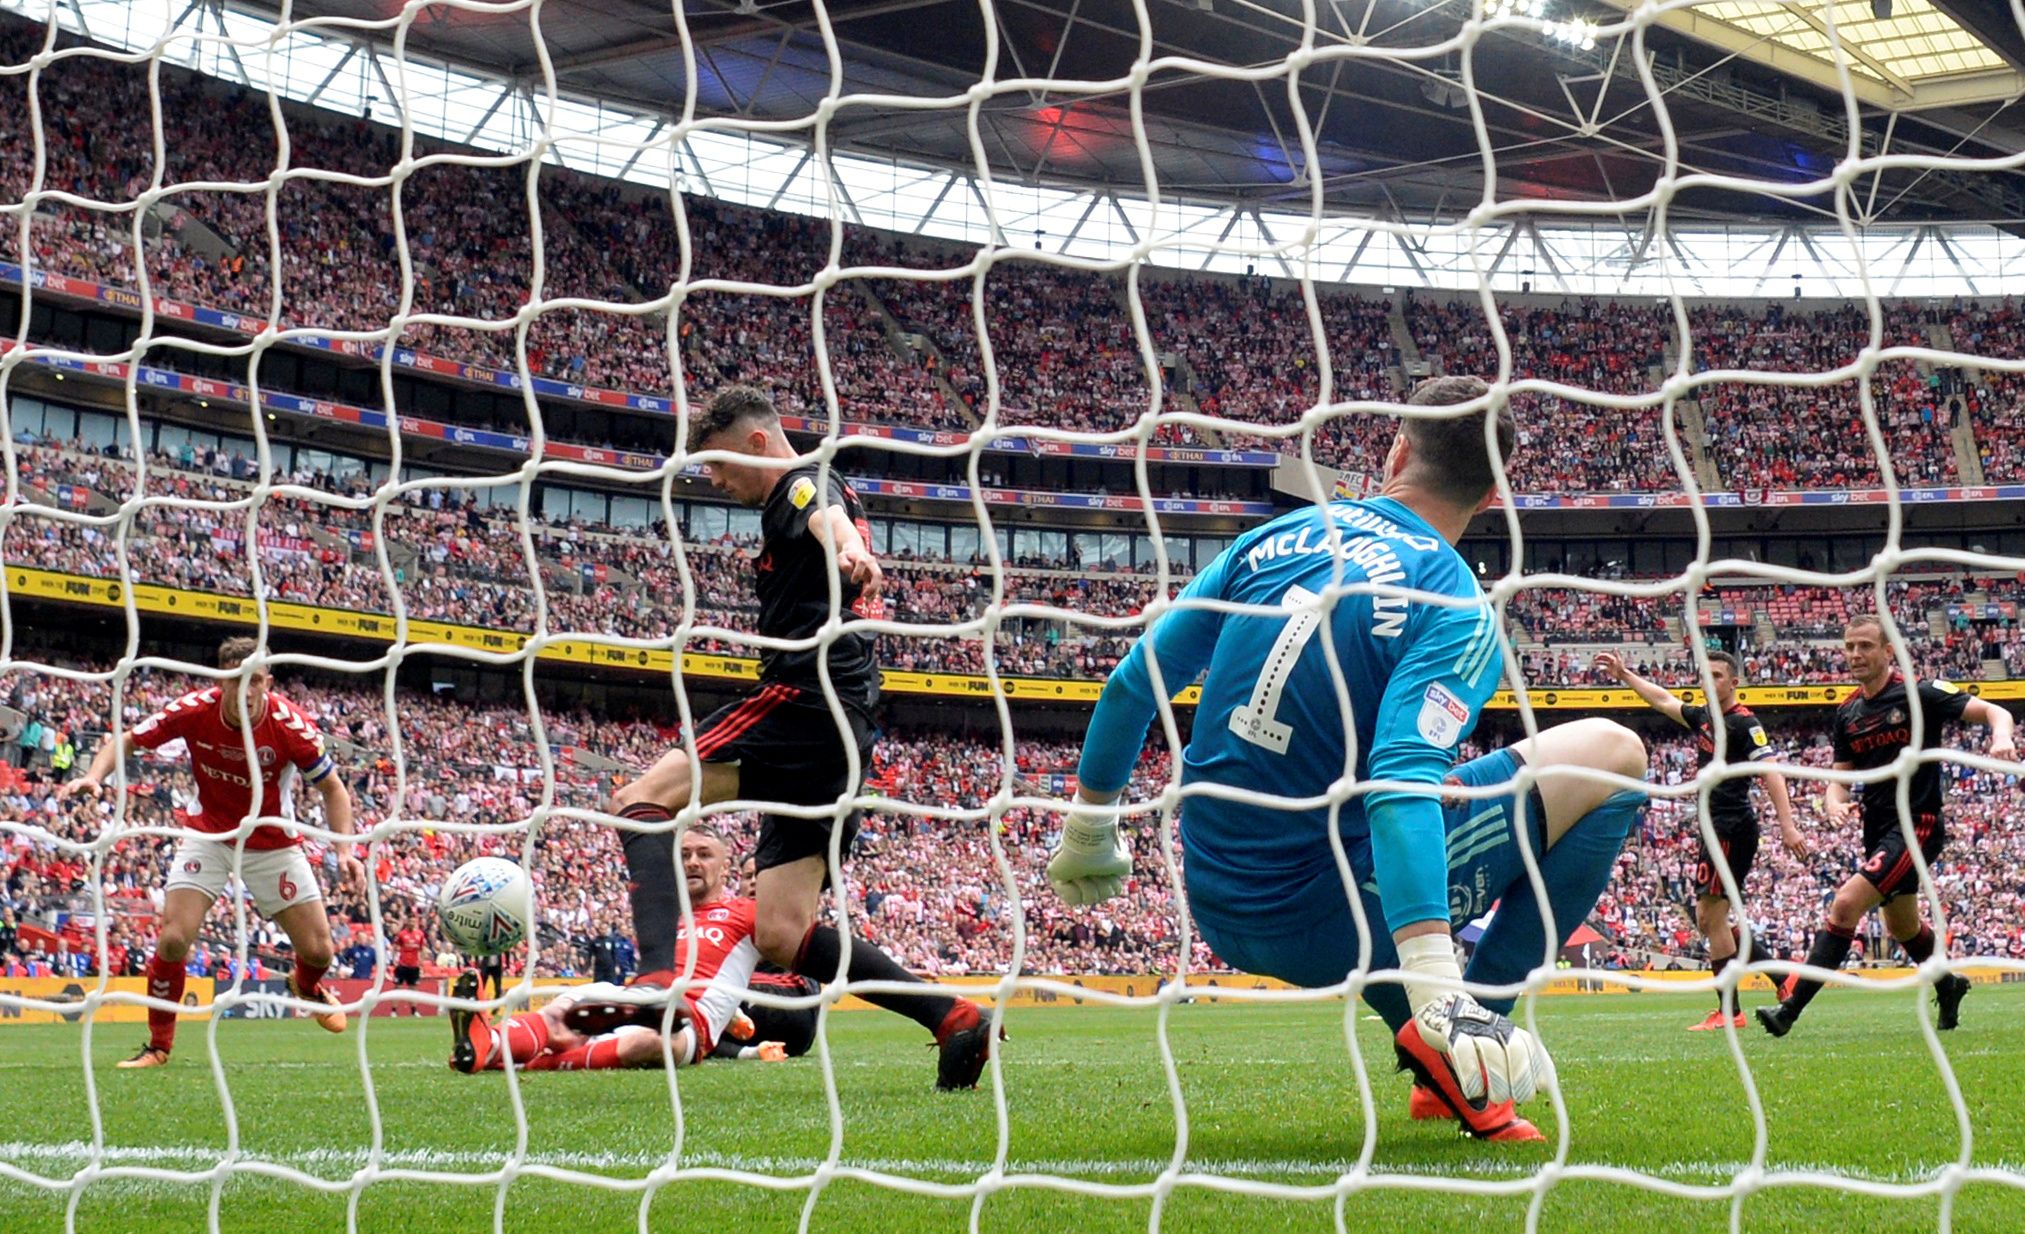 Soccer Football - League One Playoff Final - Sunderland v Charlton Athletic - Wembley Stadium, London, Britain - May 26, 2019  Charlton Athletic's Patrick Bauer scores their second goal   Action Images/Tony O'Brien  EDITORIAL USE ONLY. No use with unauthorized audio, video, data, fixture lists, club/league logos or 